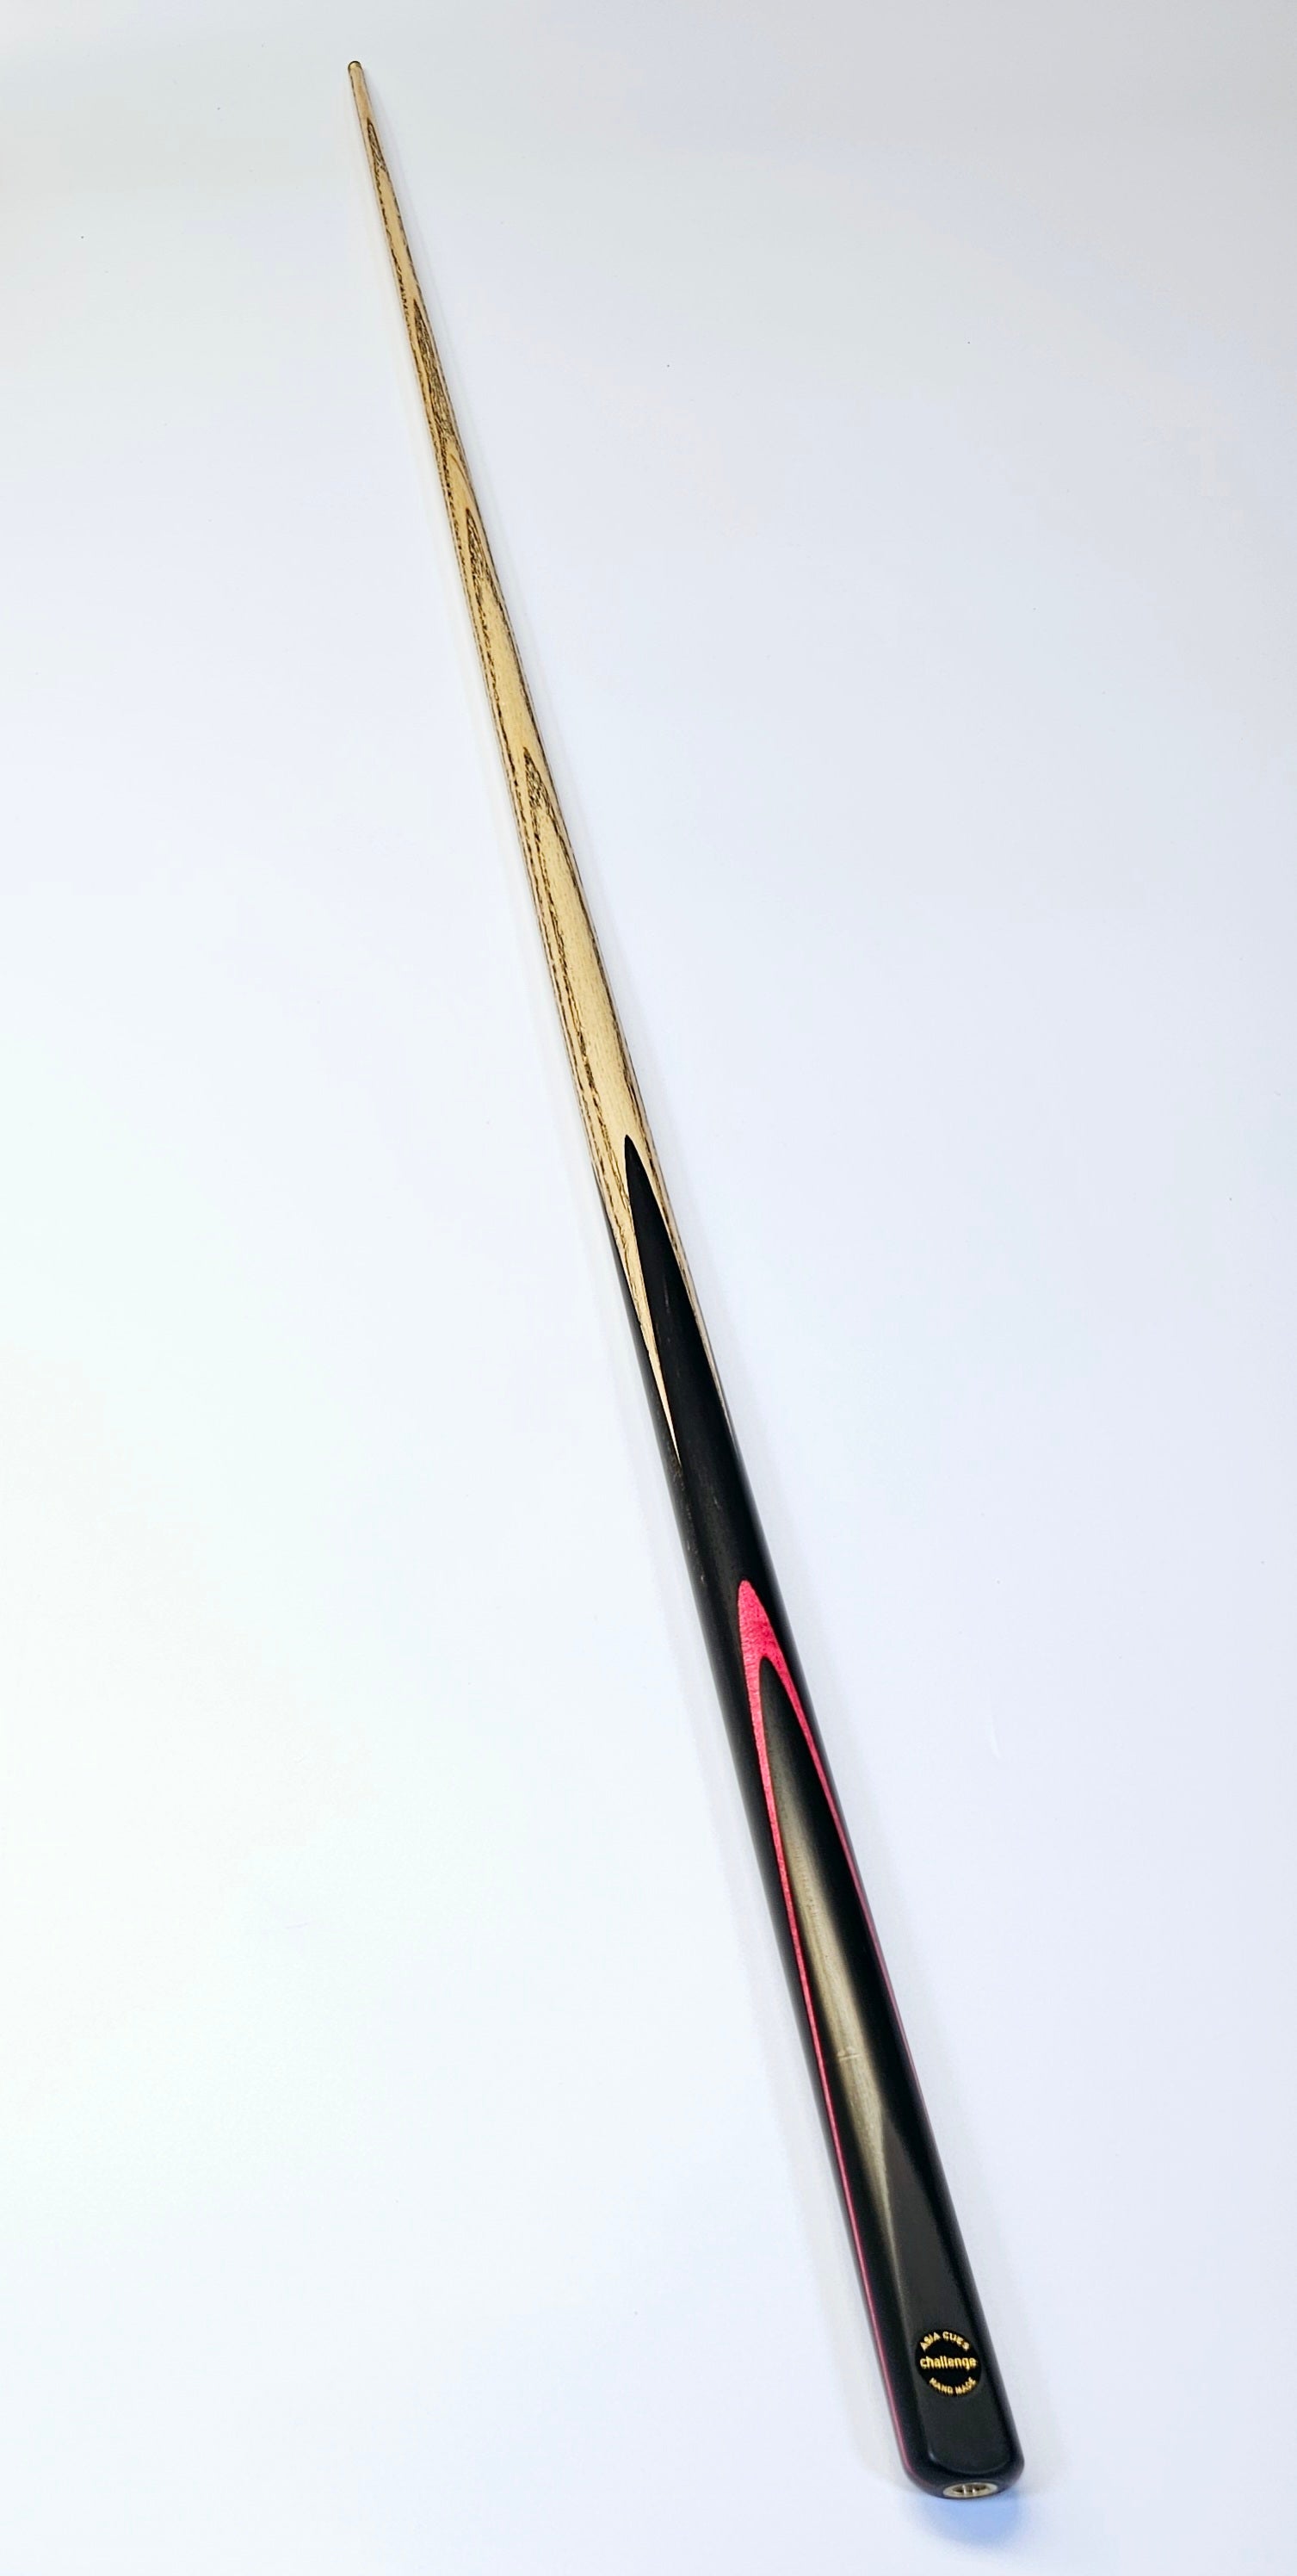 Asia Cues Challenge - One Piece Snooker Cue 9.4mm Tip, 17.6oz, 58"